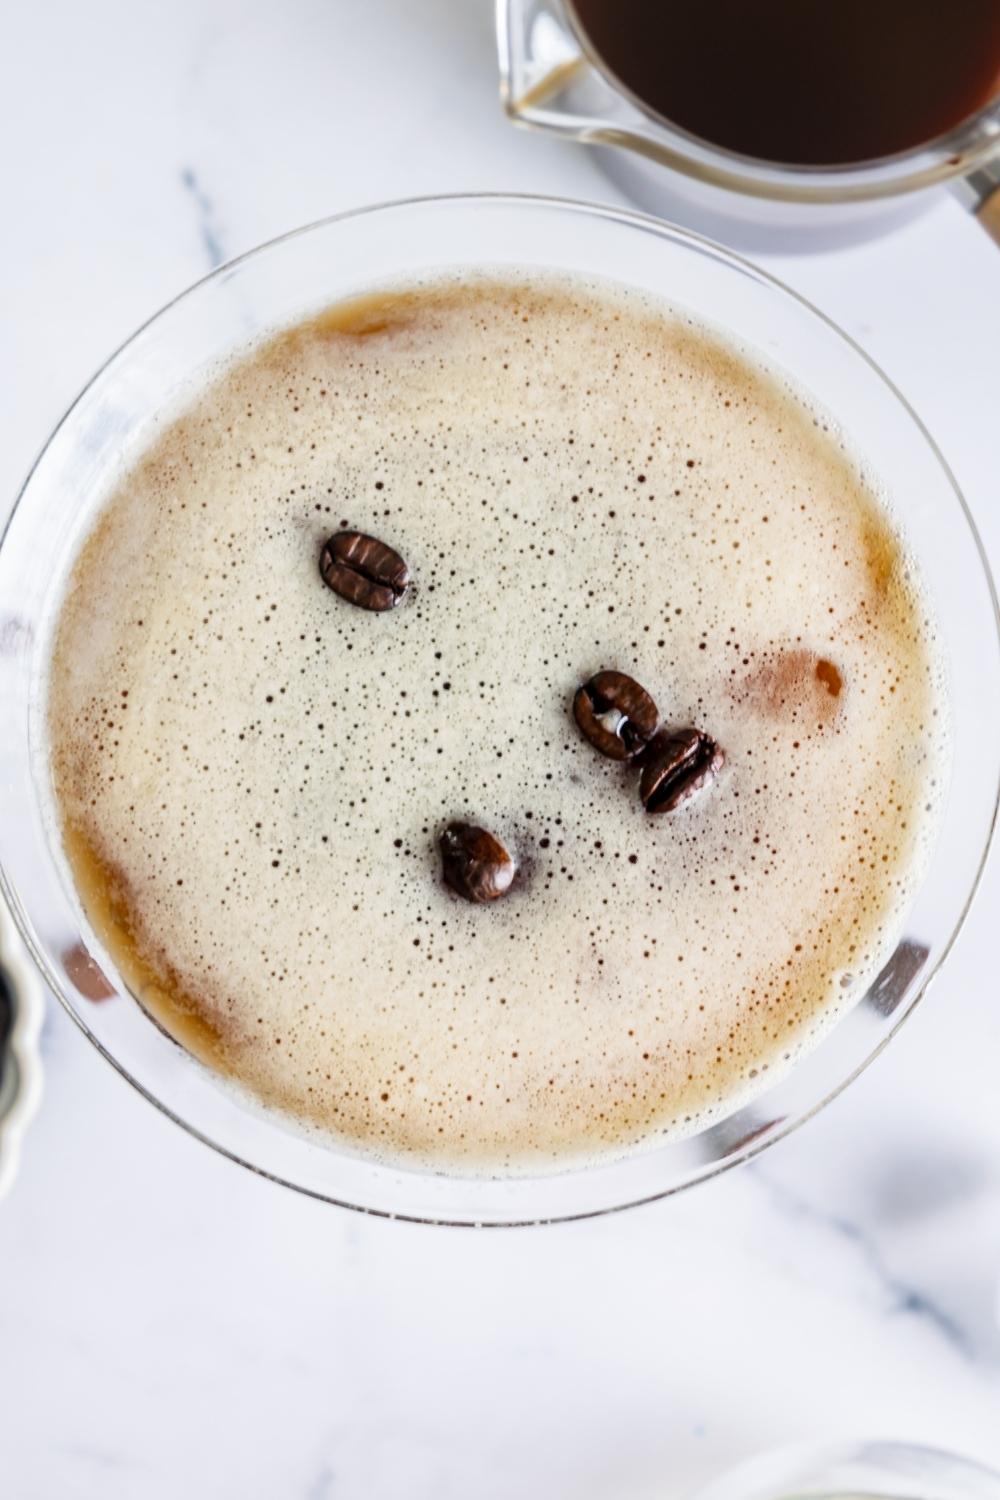 An overhead view of a martini glass with homemade espresso martini garnished with espresso beans.